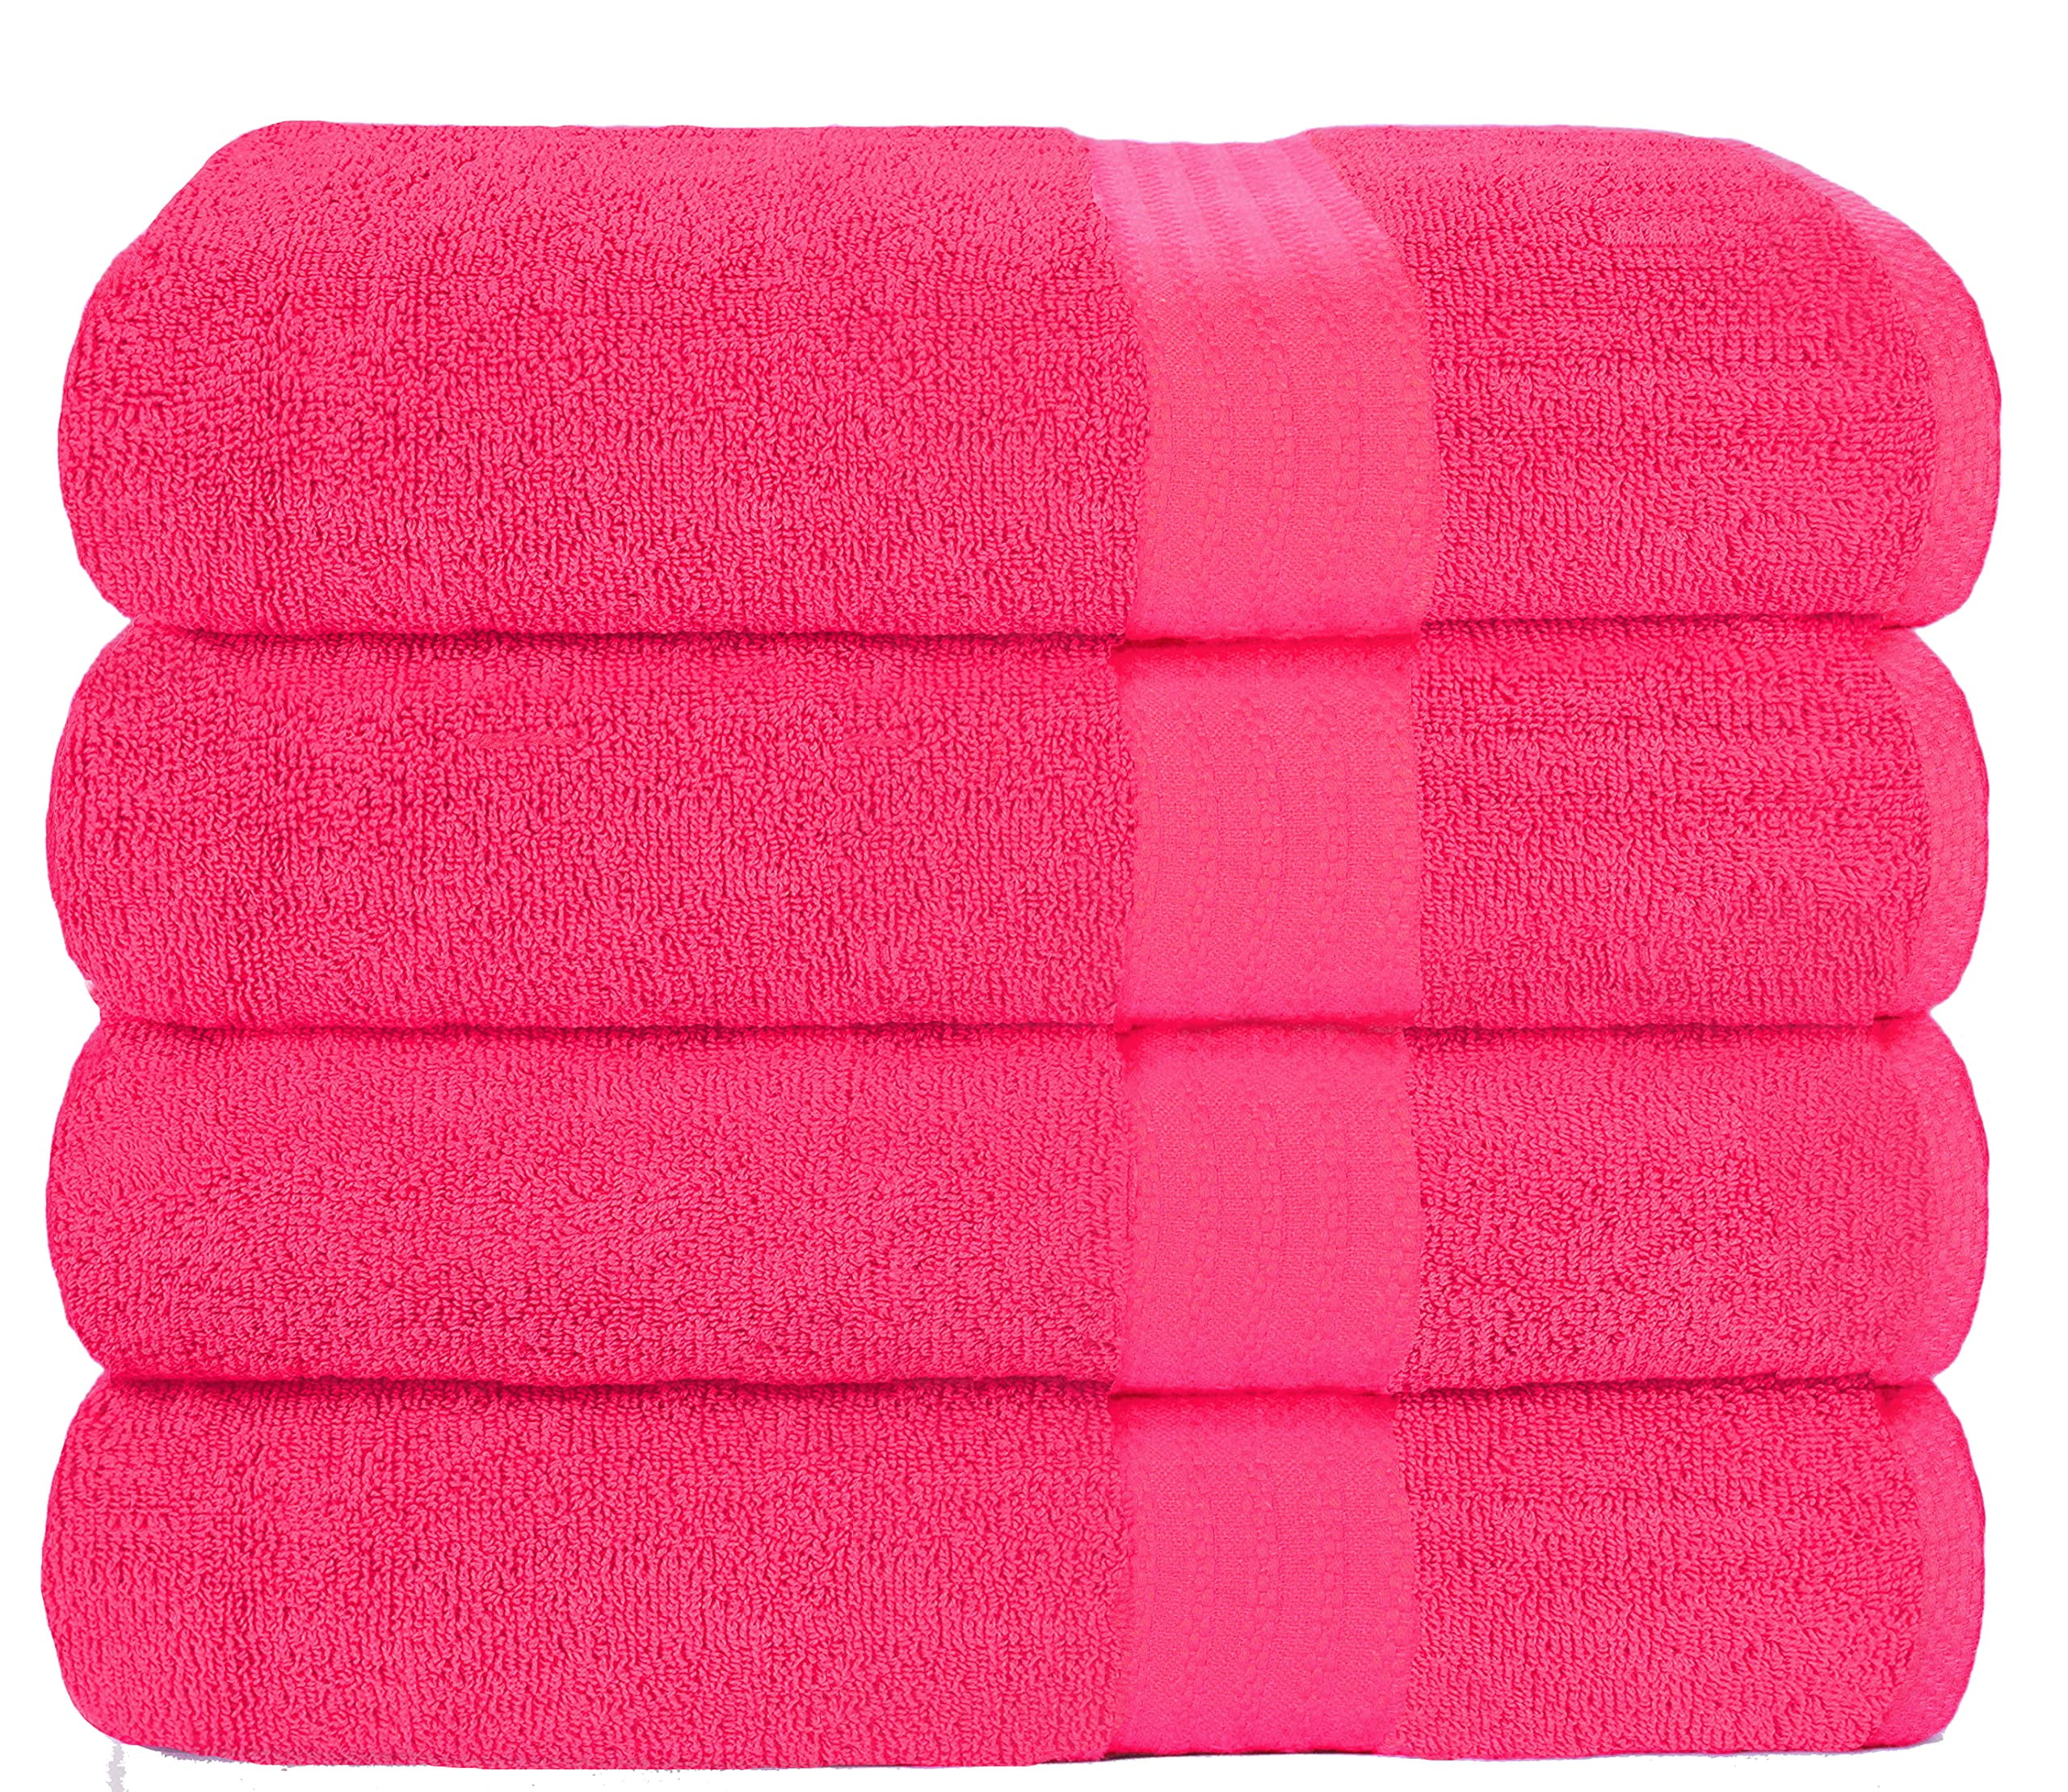 4 Pack 100% Virgin Cotton Bath Towel Set Extra Absorbent 700 GSM Hotel Quality 